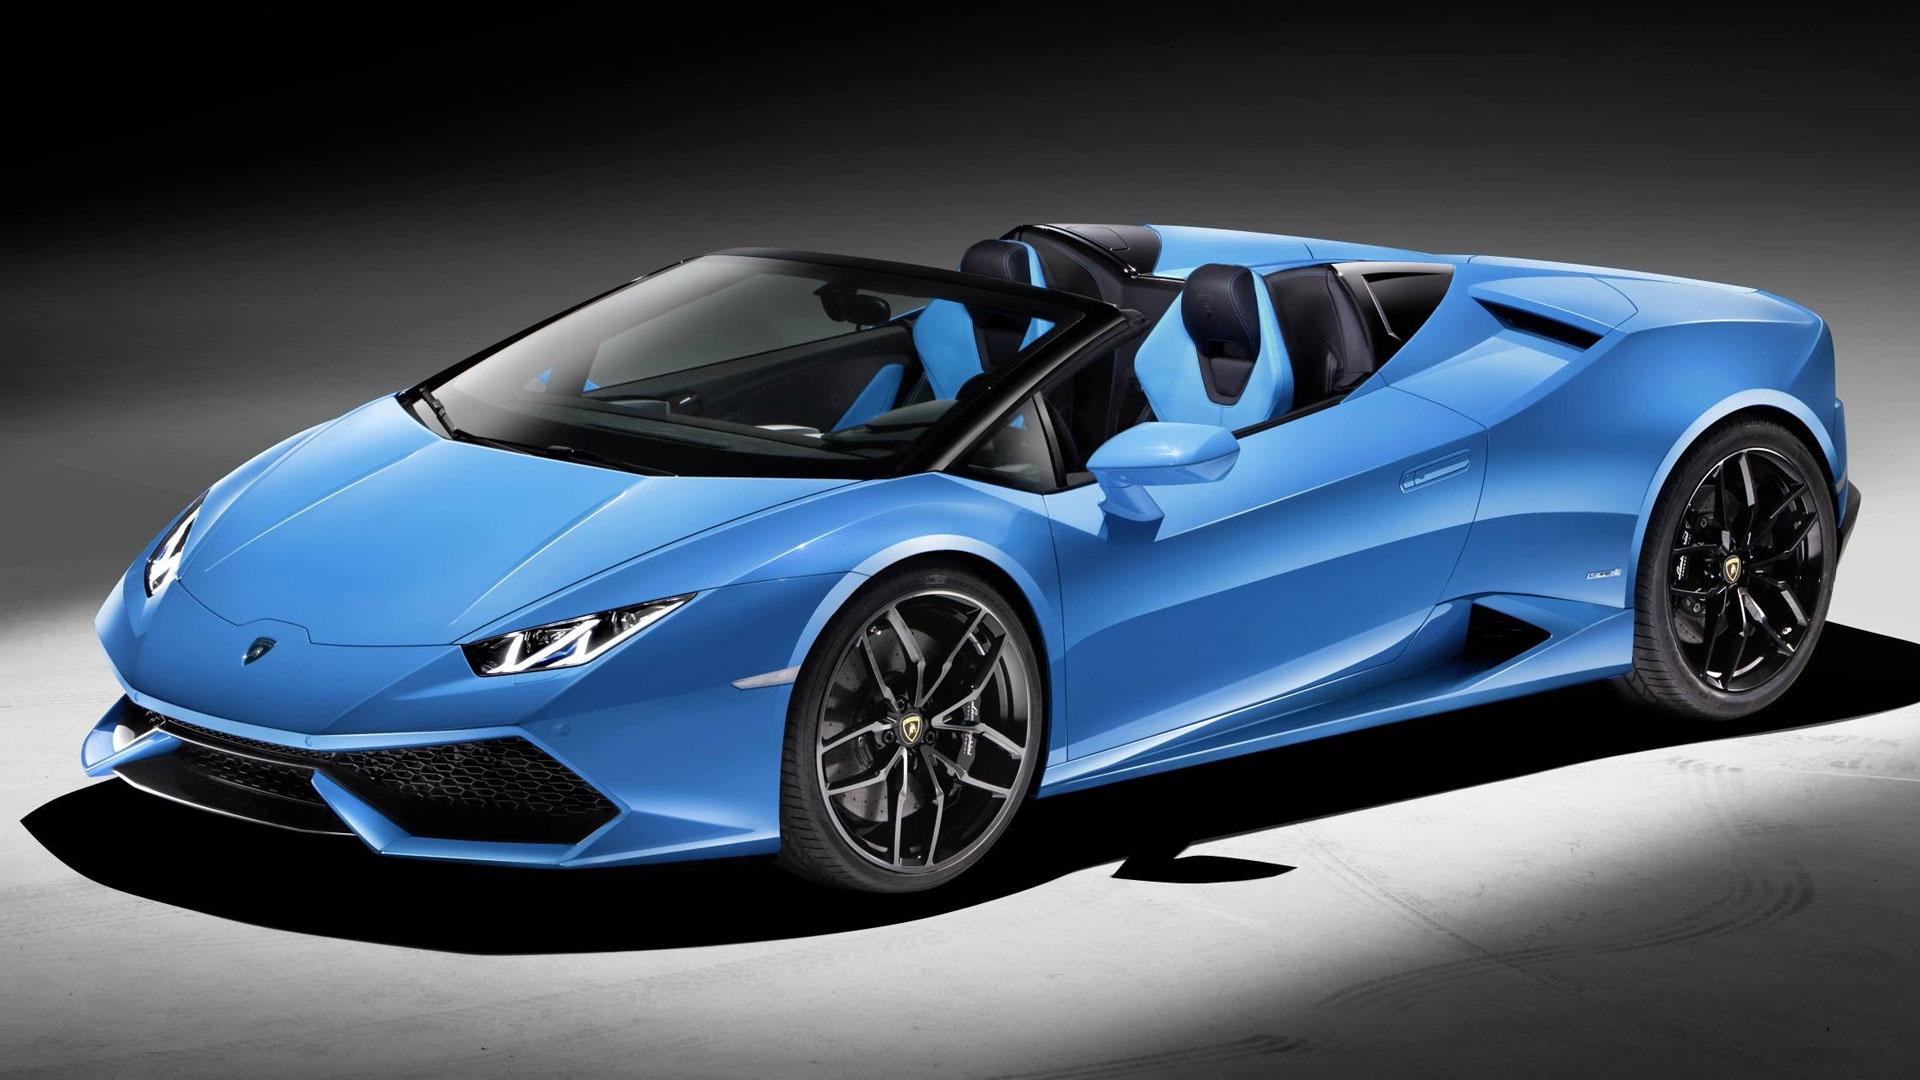 Lamborghini Huracán Levels Up, Now Makes a Staggering 630 HP